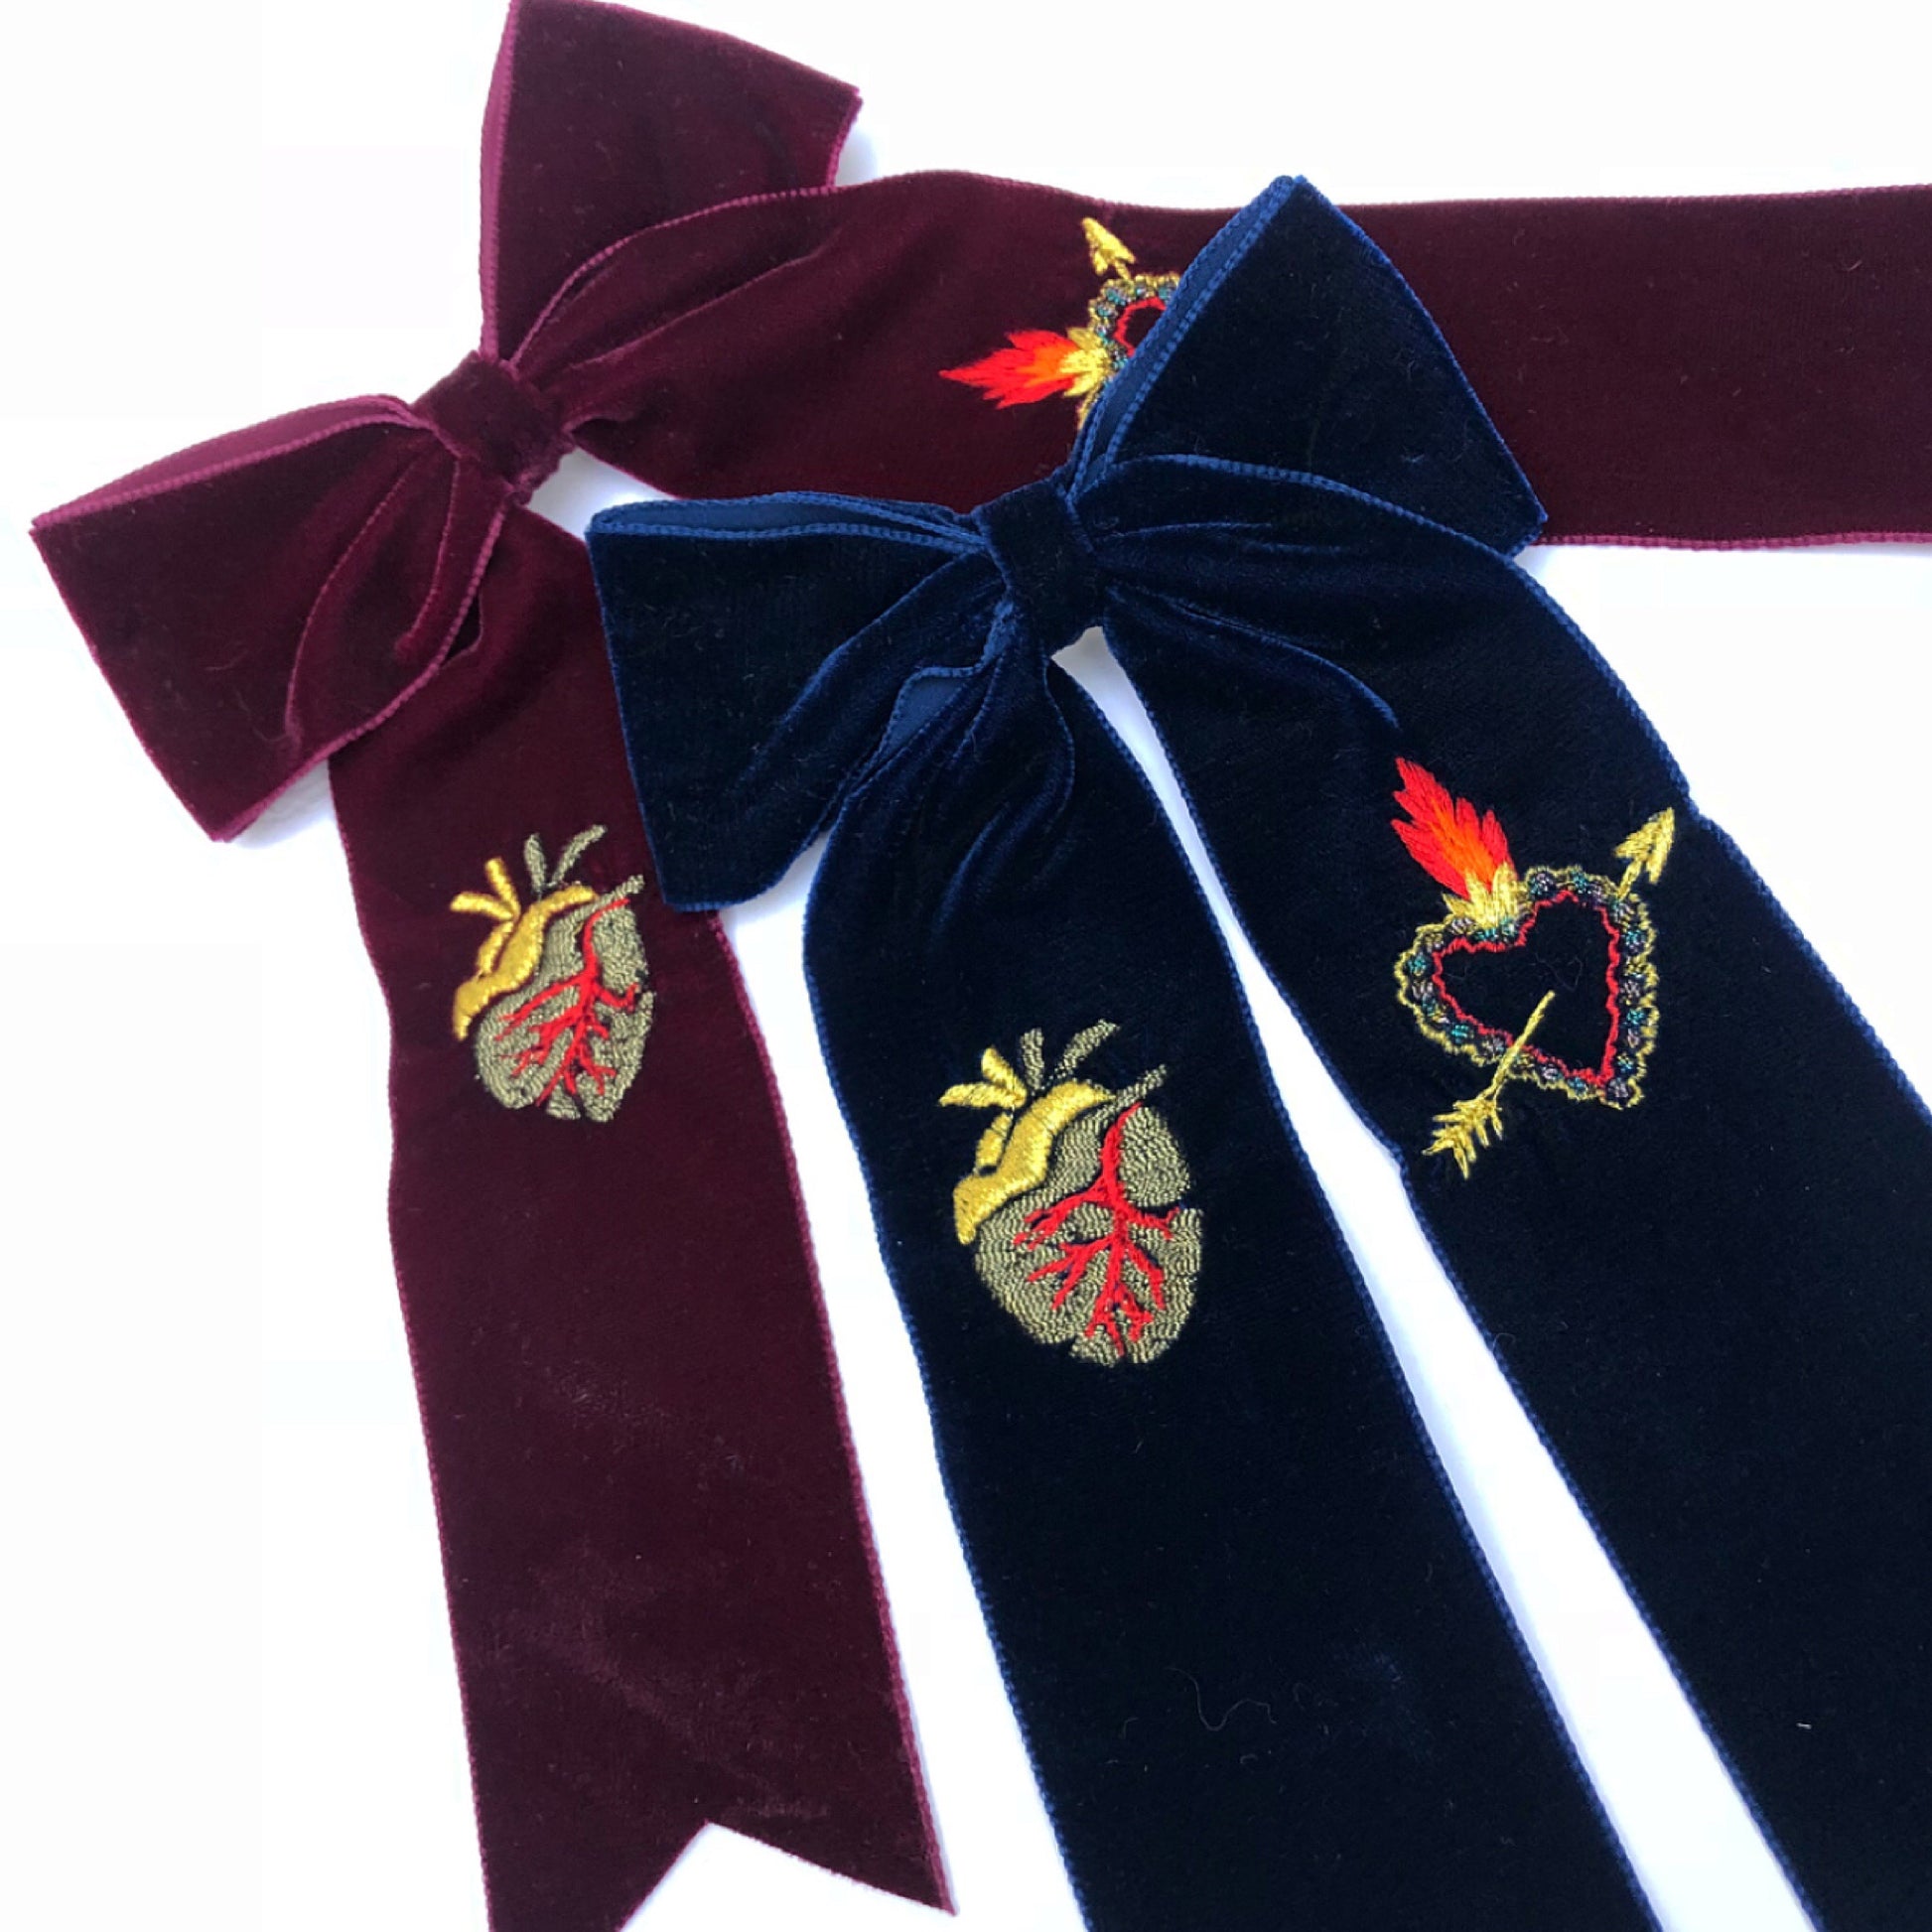 A maroon velvet embroidered hair bow with a navy blue embroidered hair bow lying on top, on a white background